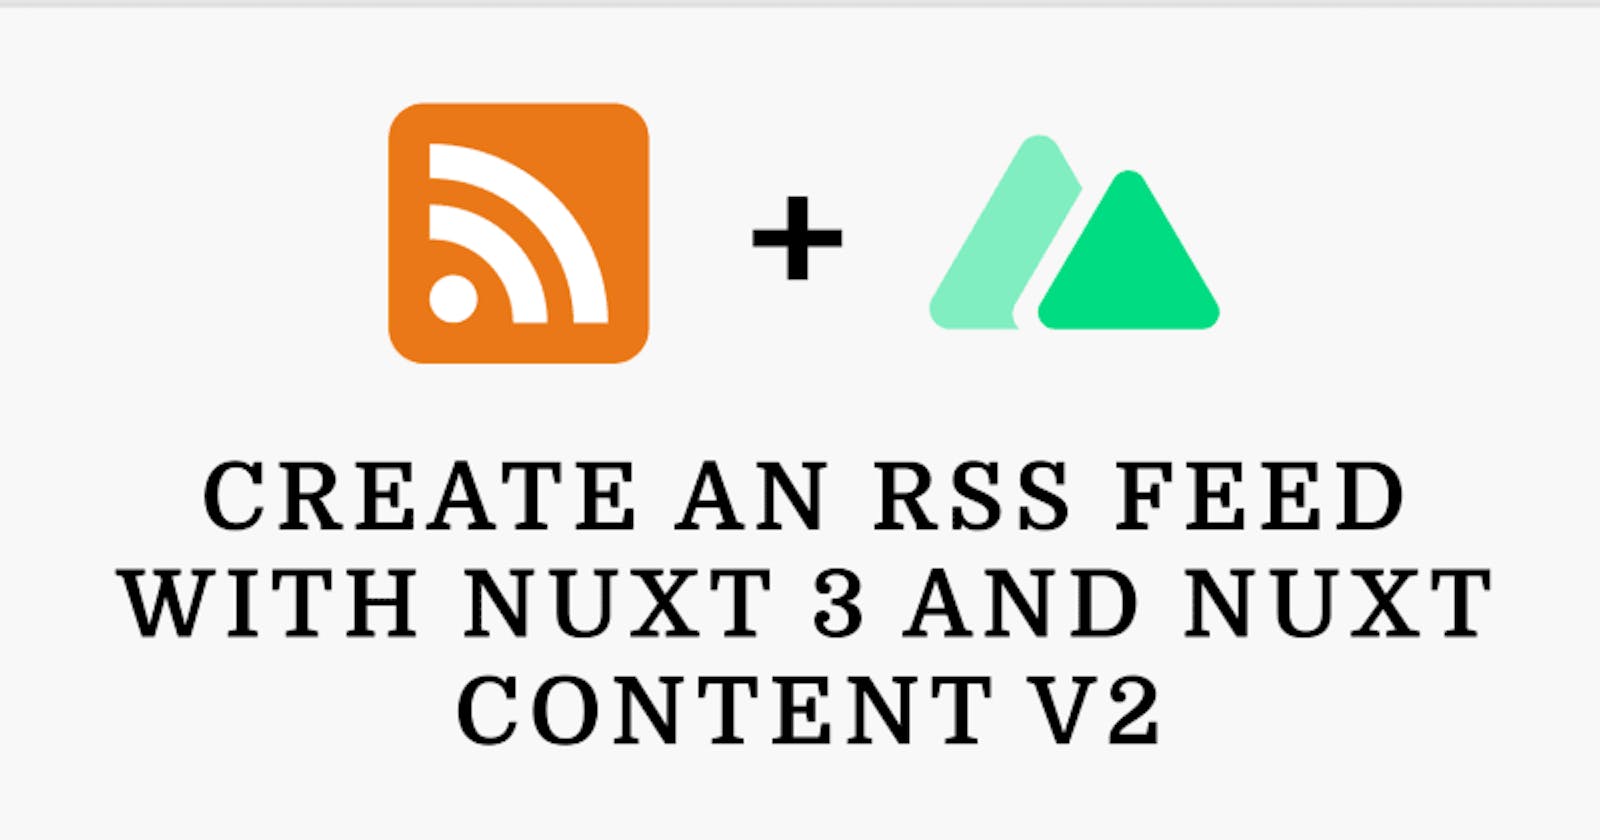 Create an RSS Feed With Nuxt 3 and Nuxt Content v2